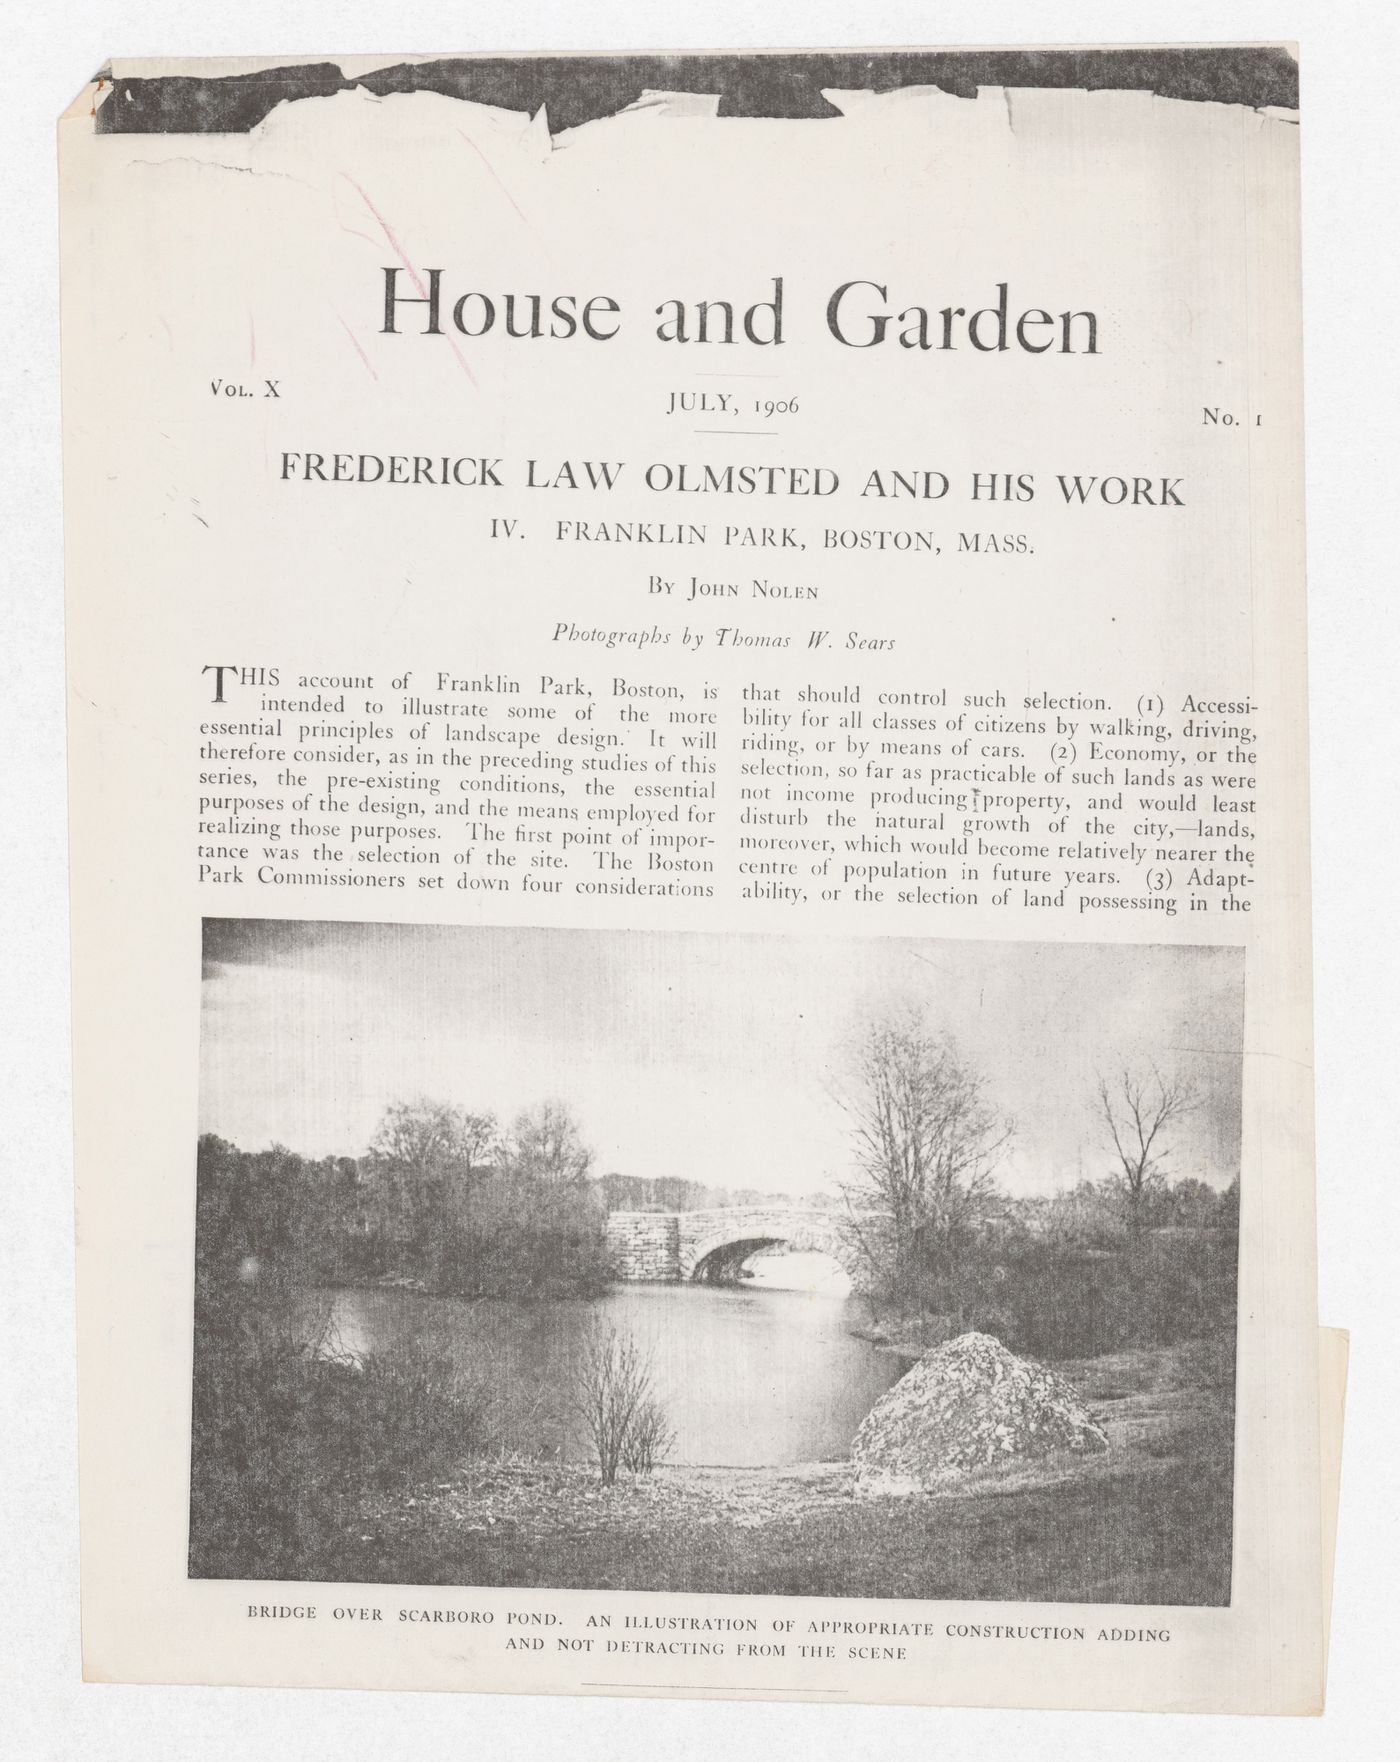 Photocopy of article by John Nolen, Frederick Law Olmsted and his work, House and Garden, Vol X, No. 1 for the exhibition Olmsted: L'origine del parco urbano e del parco naturale contemporaneo